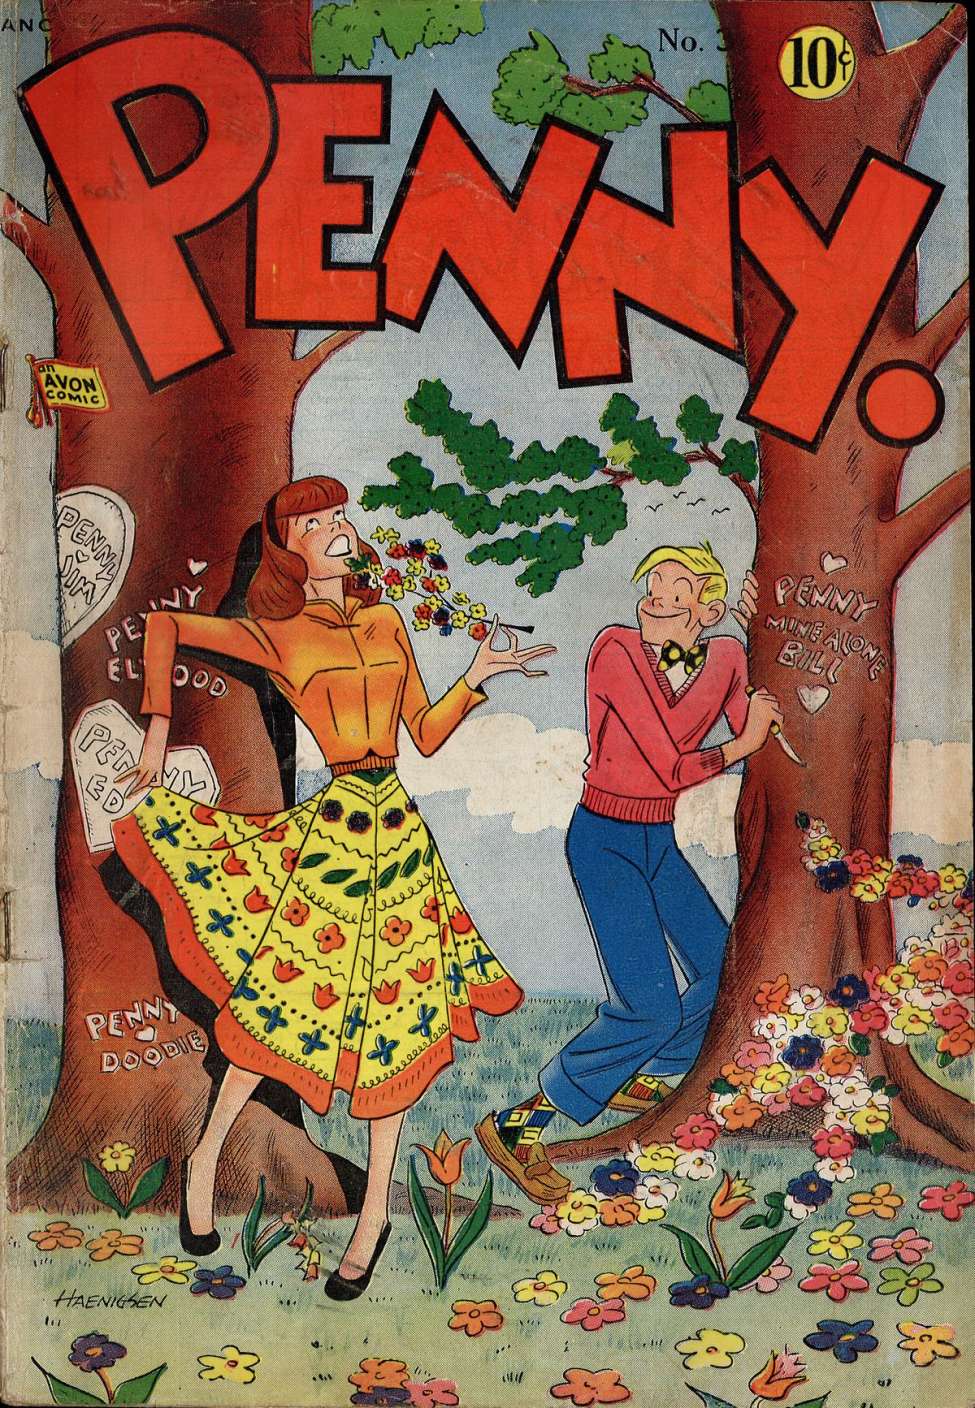 Book Cover For Penny 3